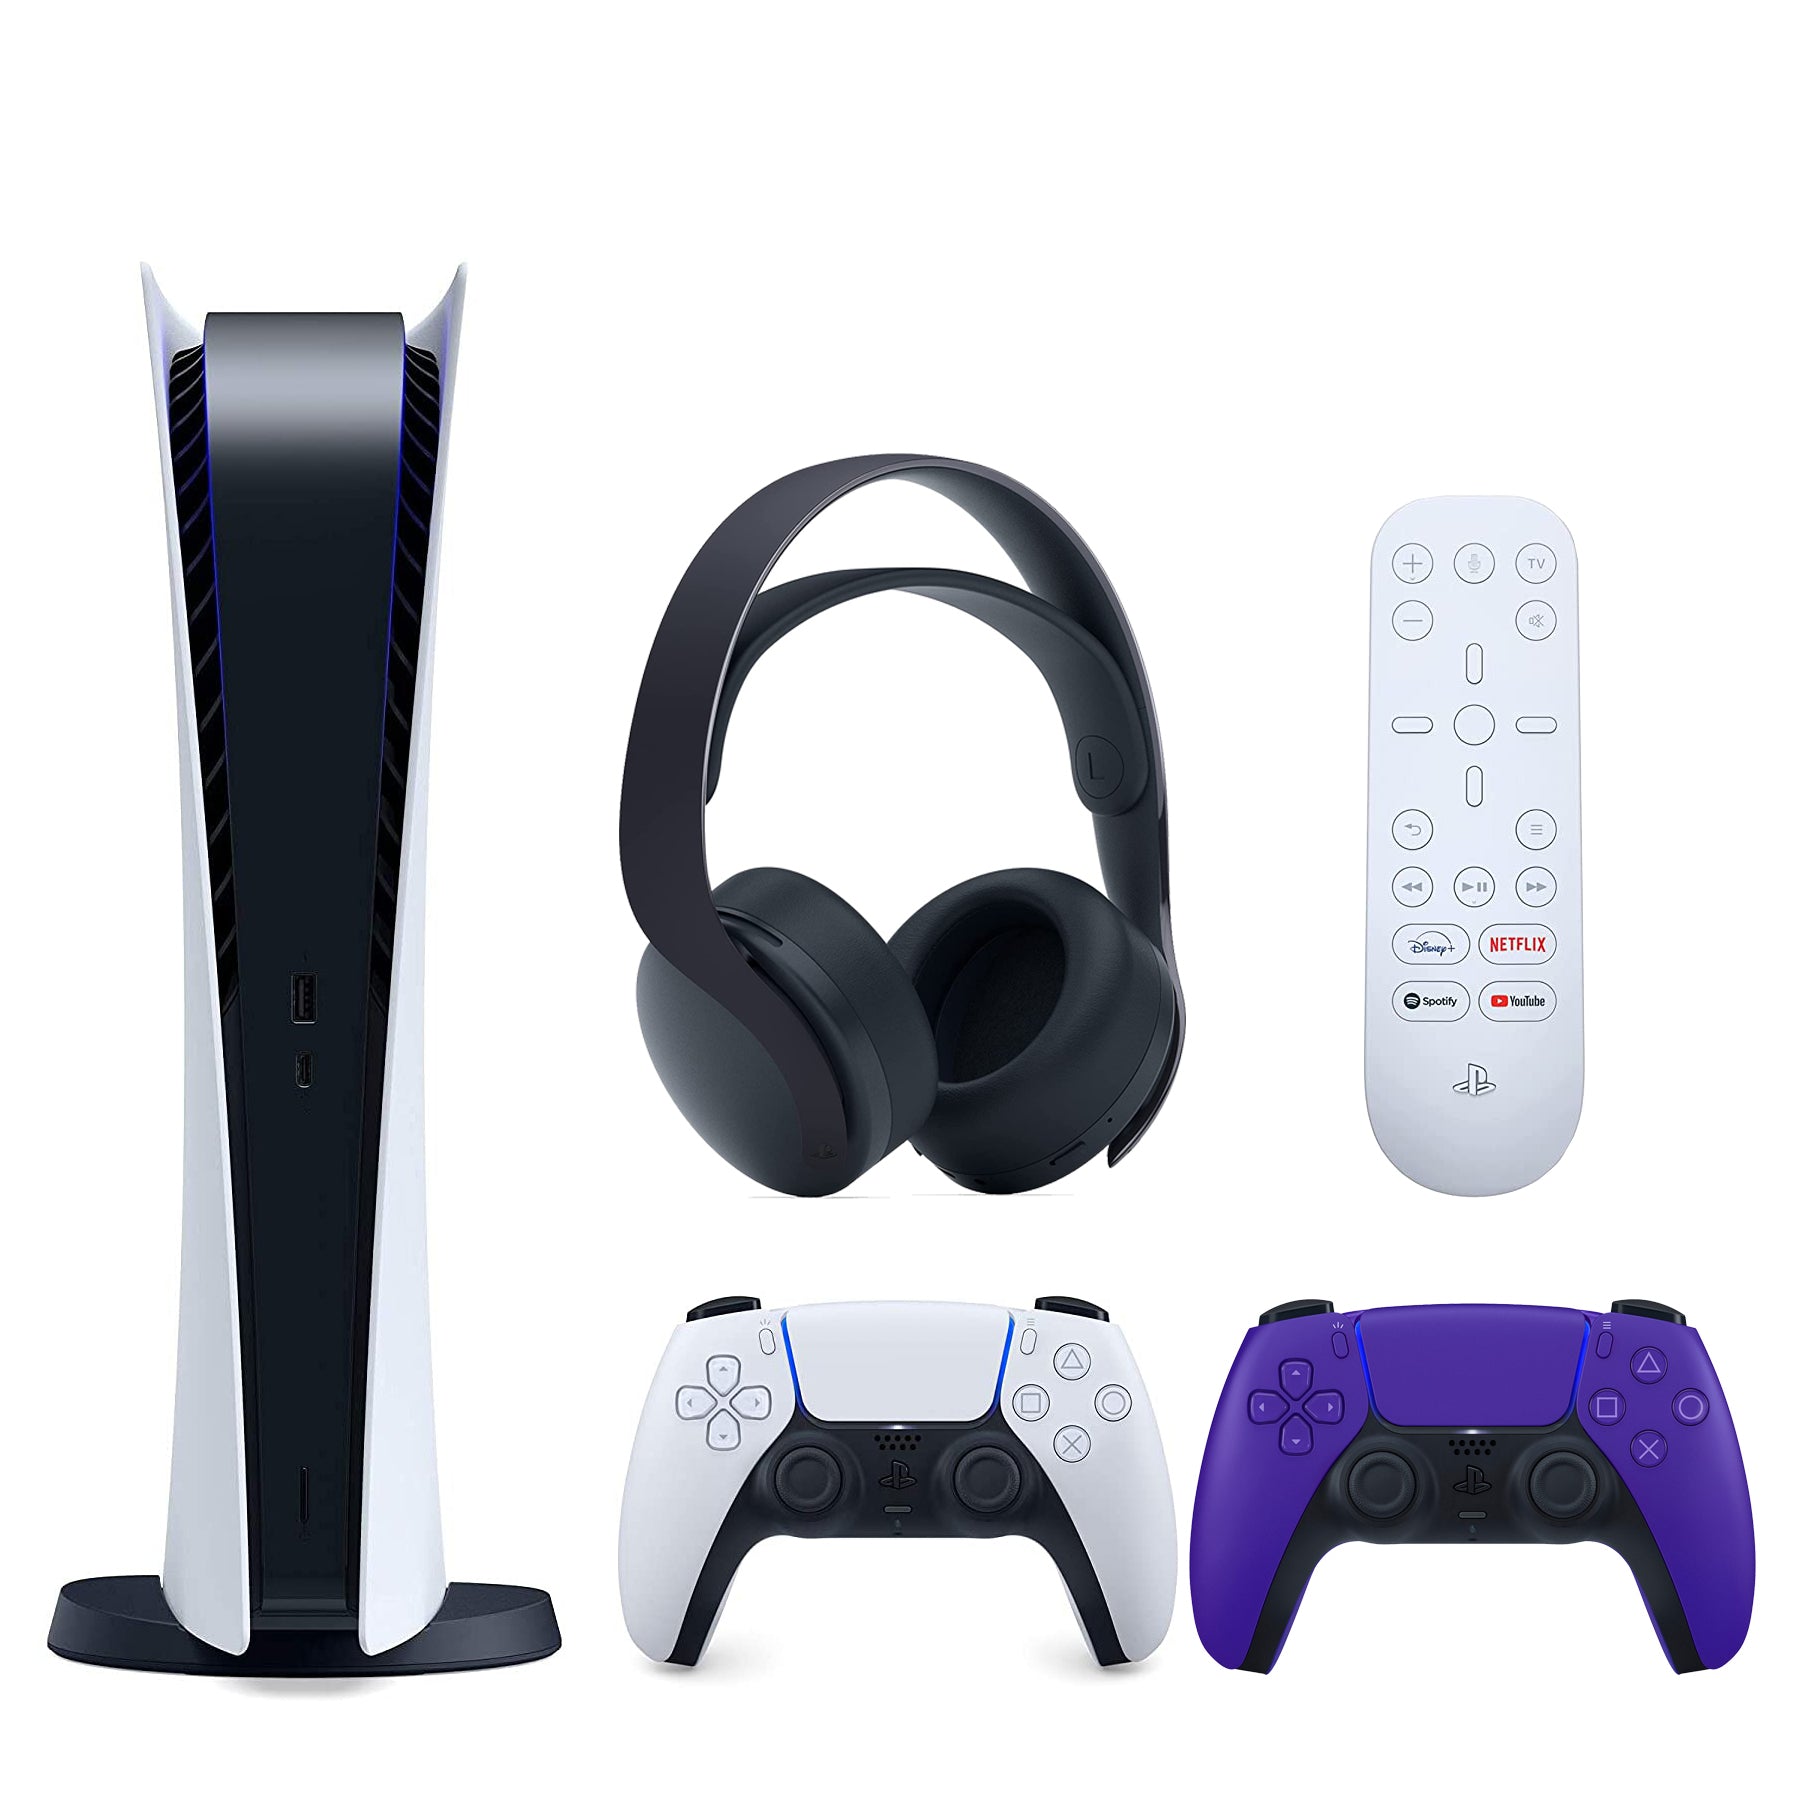 Sony Playstation 5 Digital Version (Sony PS5 Digital) with Extra Galactic Purple Controller, Black PULSE 3D Headset and Media Remote Bundle - Pro-Distributing